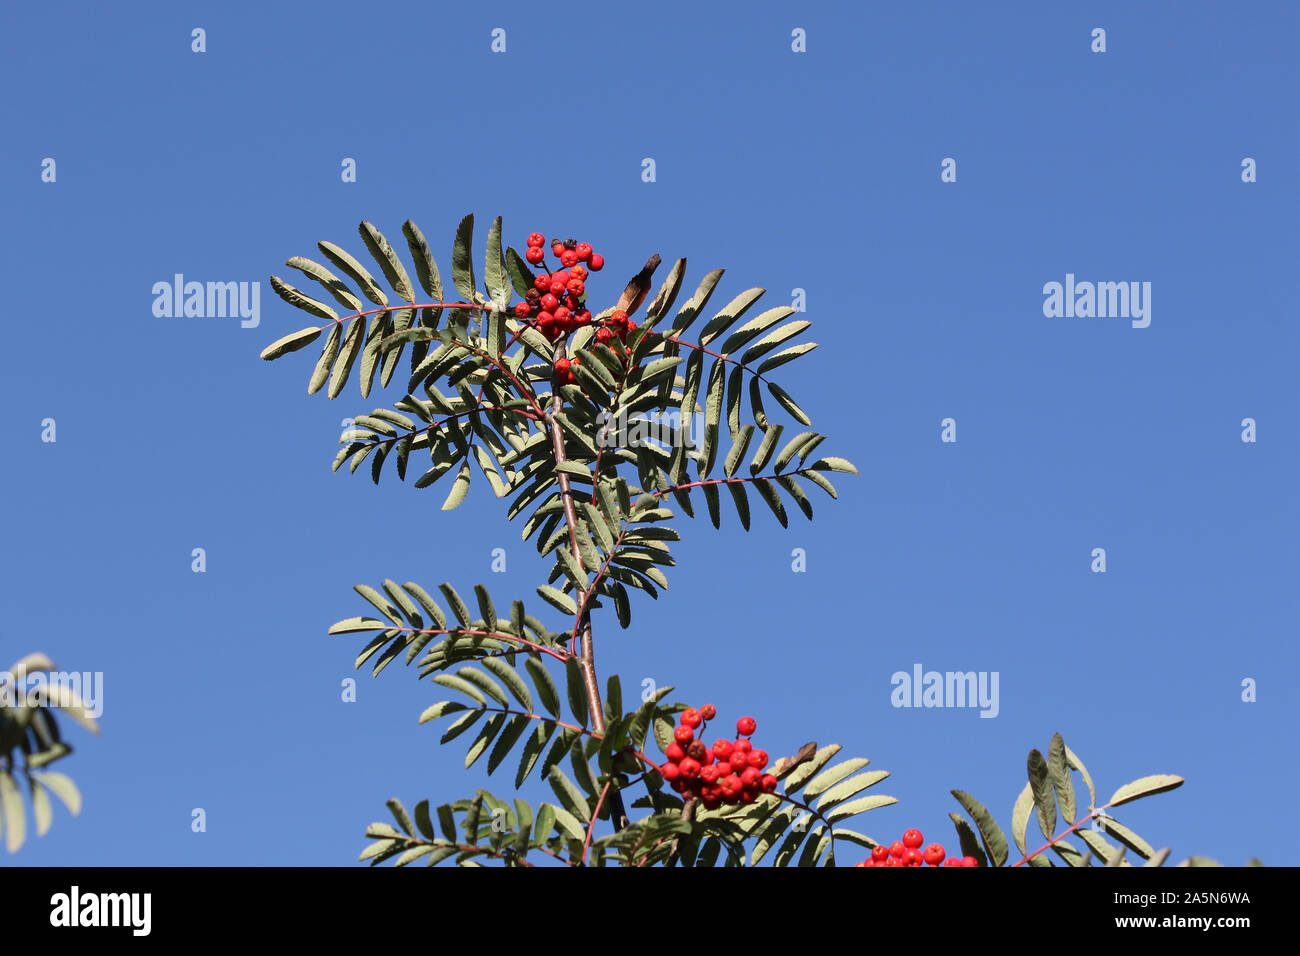 red berries on a European mountain ash tree also called a rowan Latin sorbus aucuparia in autumn or fall in Oxford England Stock Photo